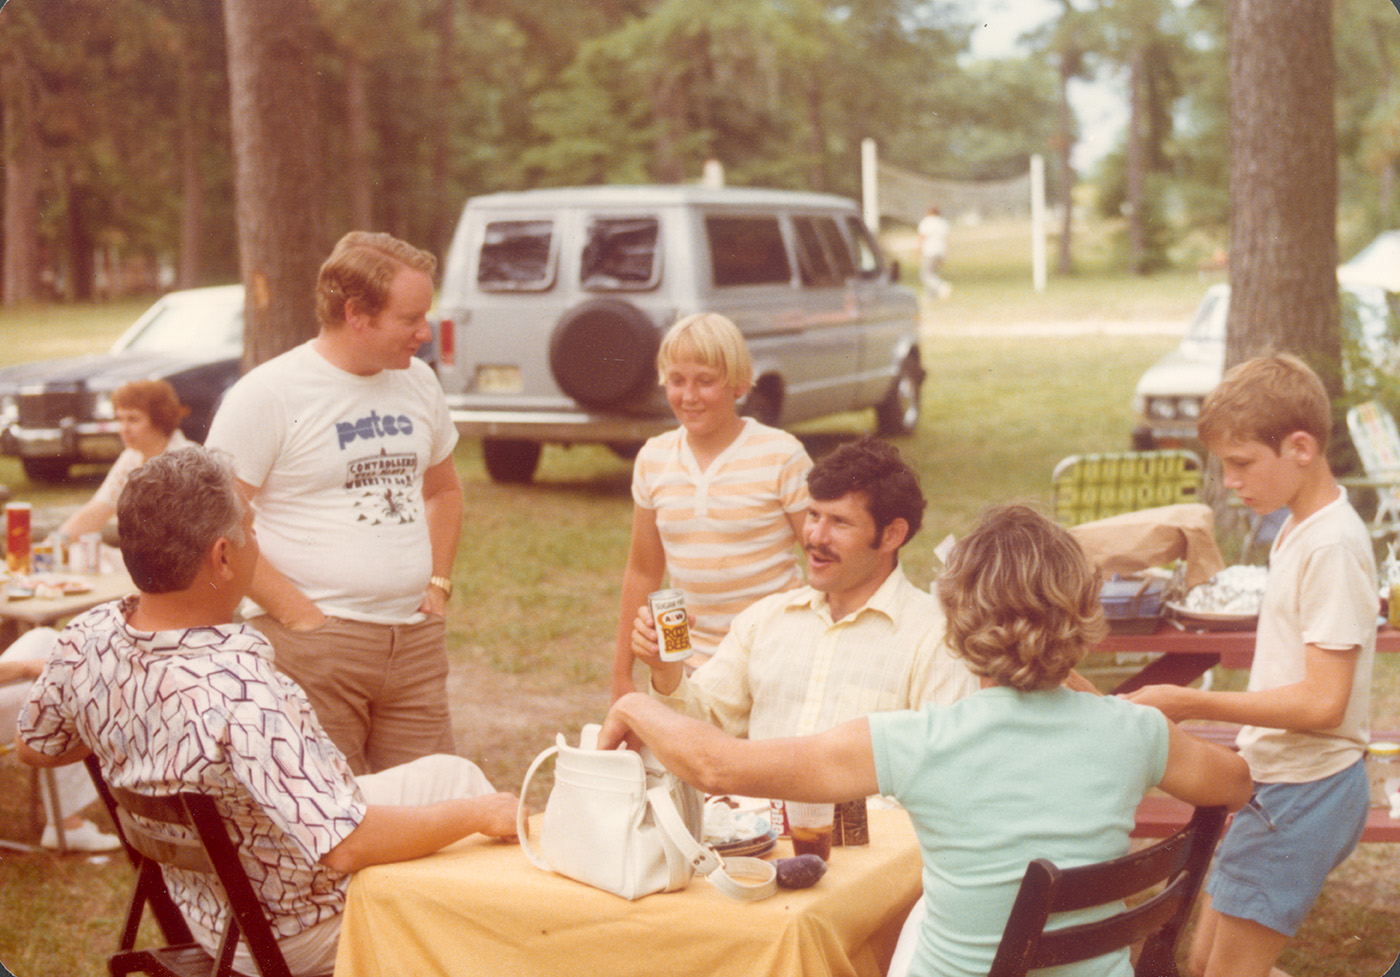 Group of people sitting and standing around a table at a picnic. Cars and trees are in the background.